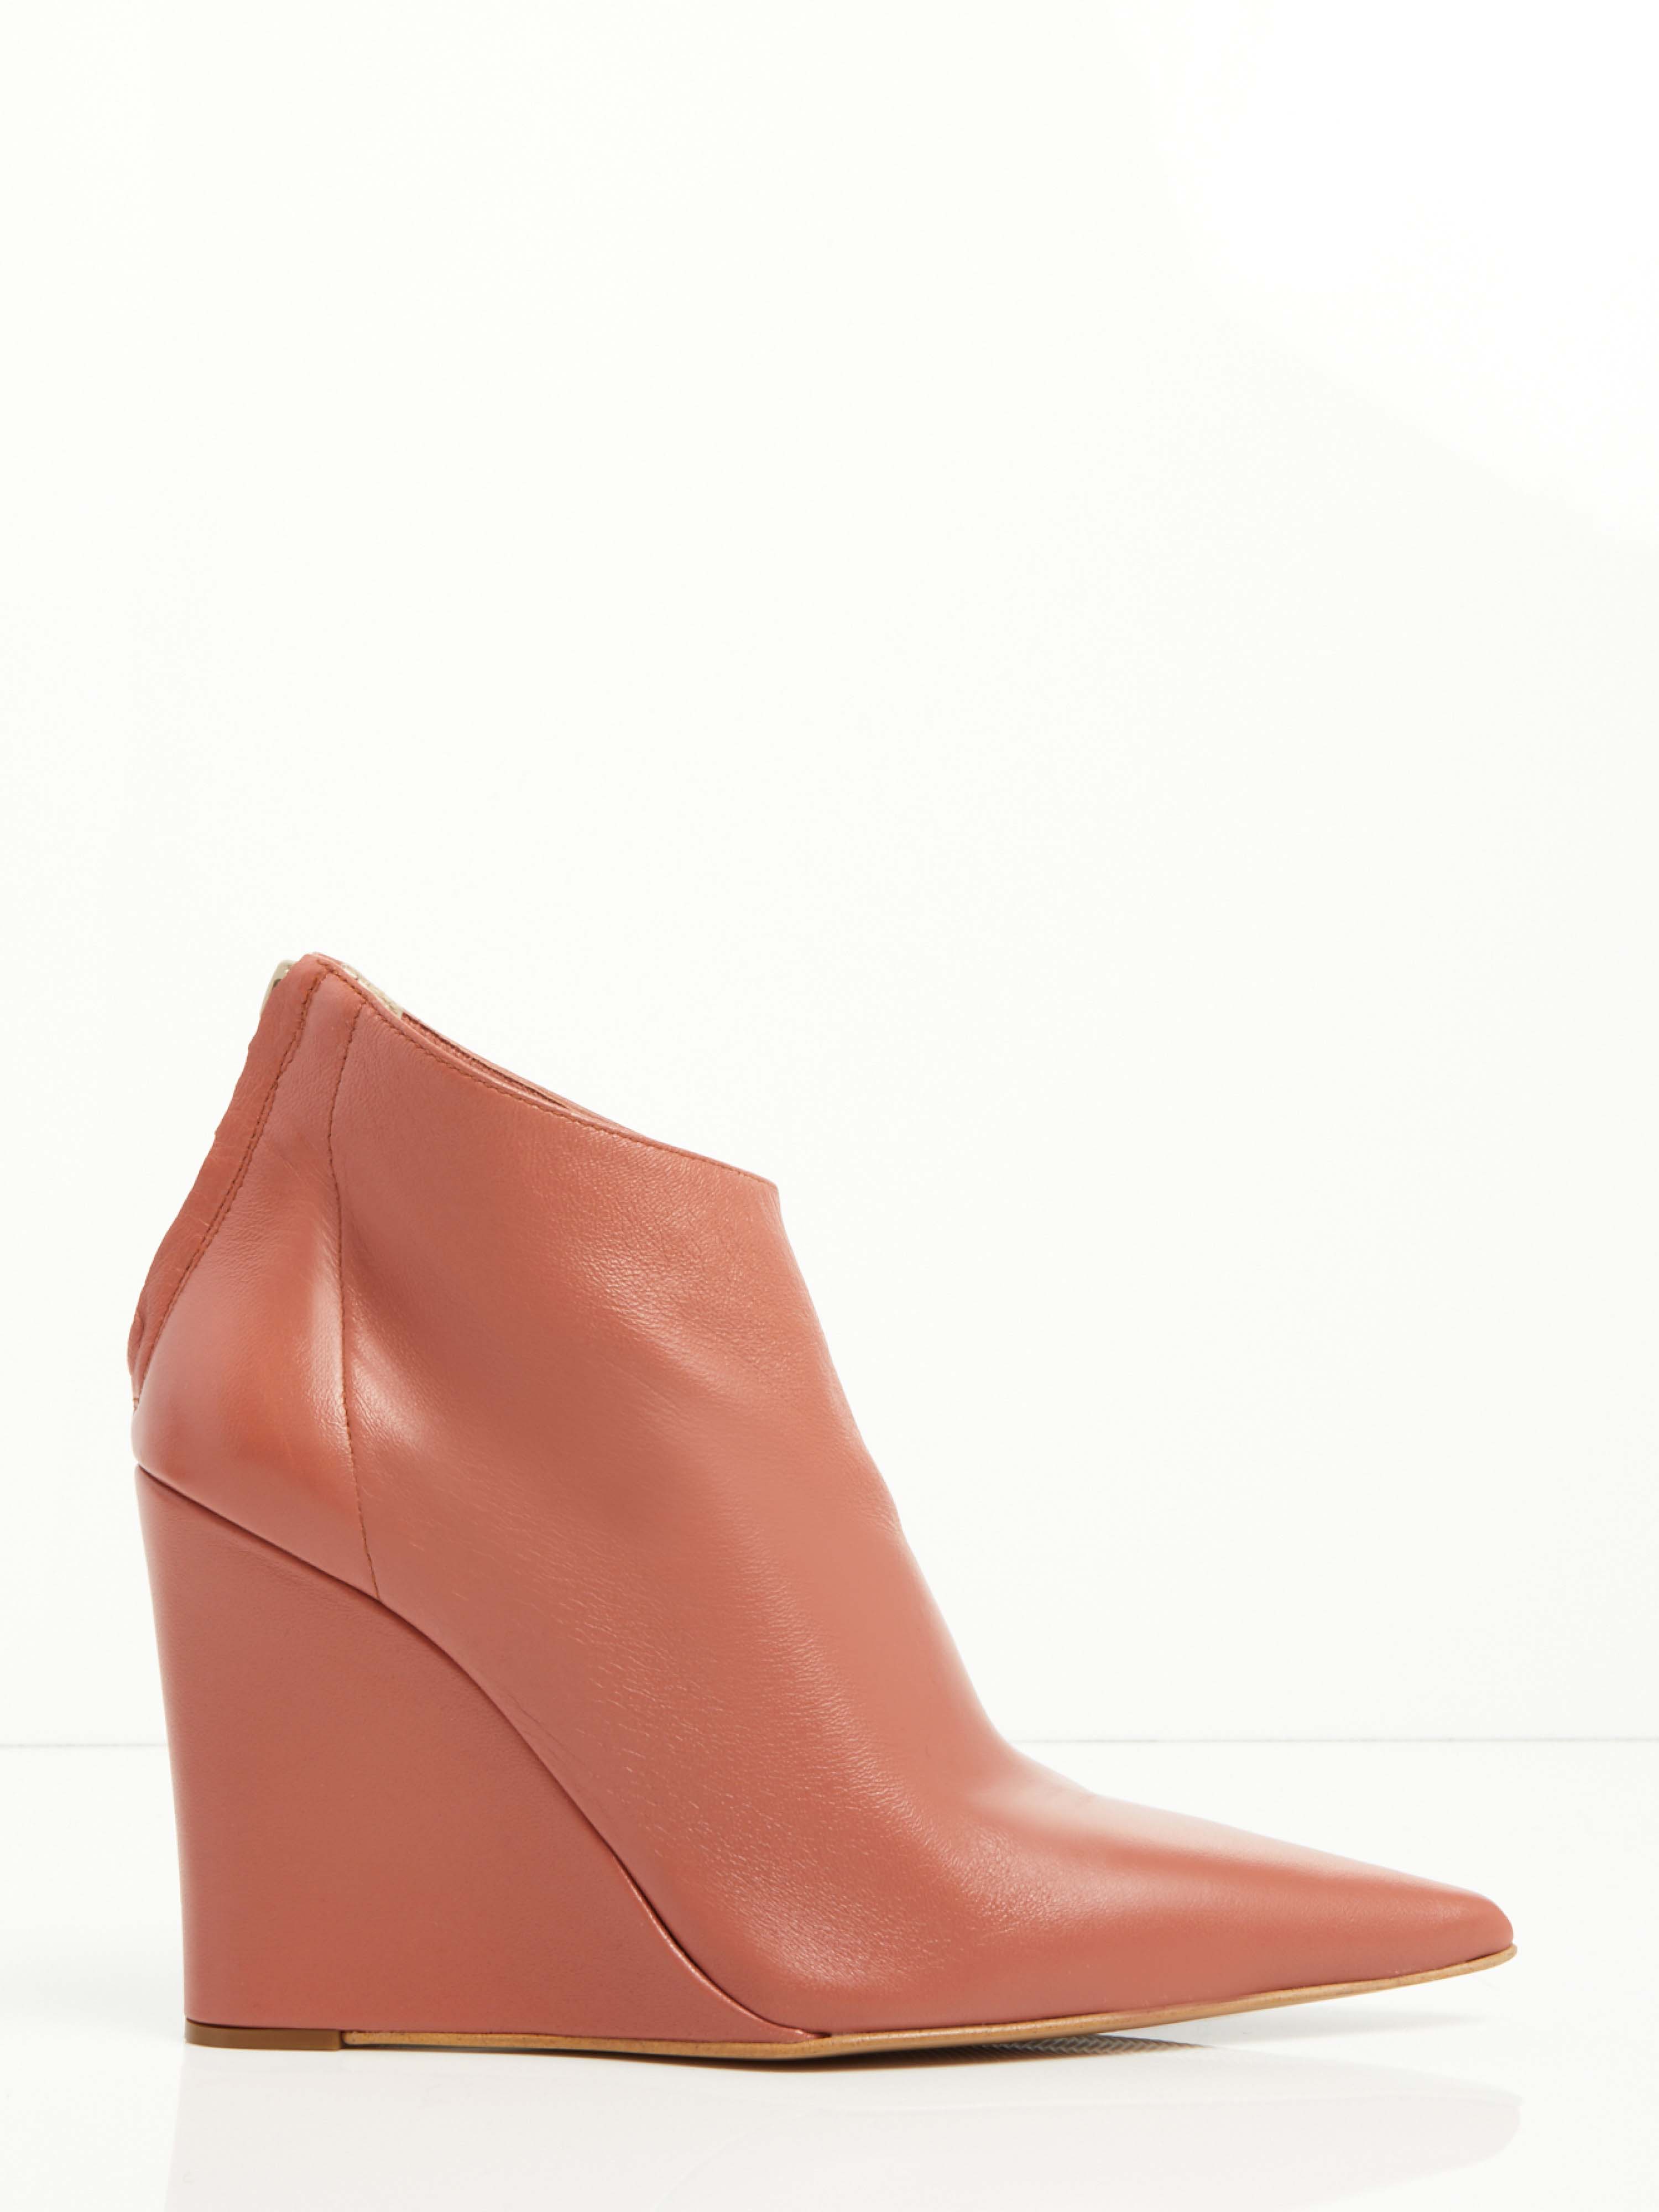 Offerte Wedge Leather Ankle Boots F0545554-0470 Economici